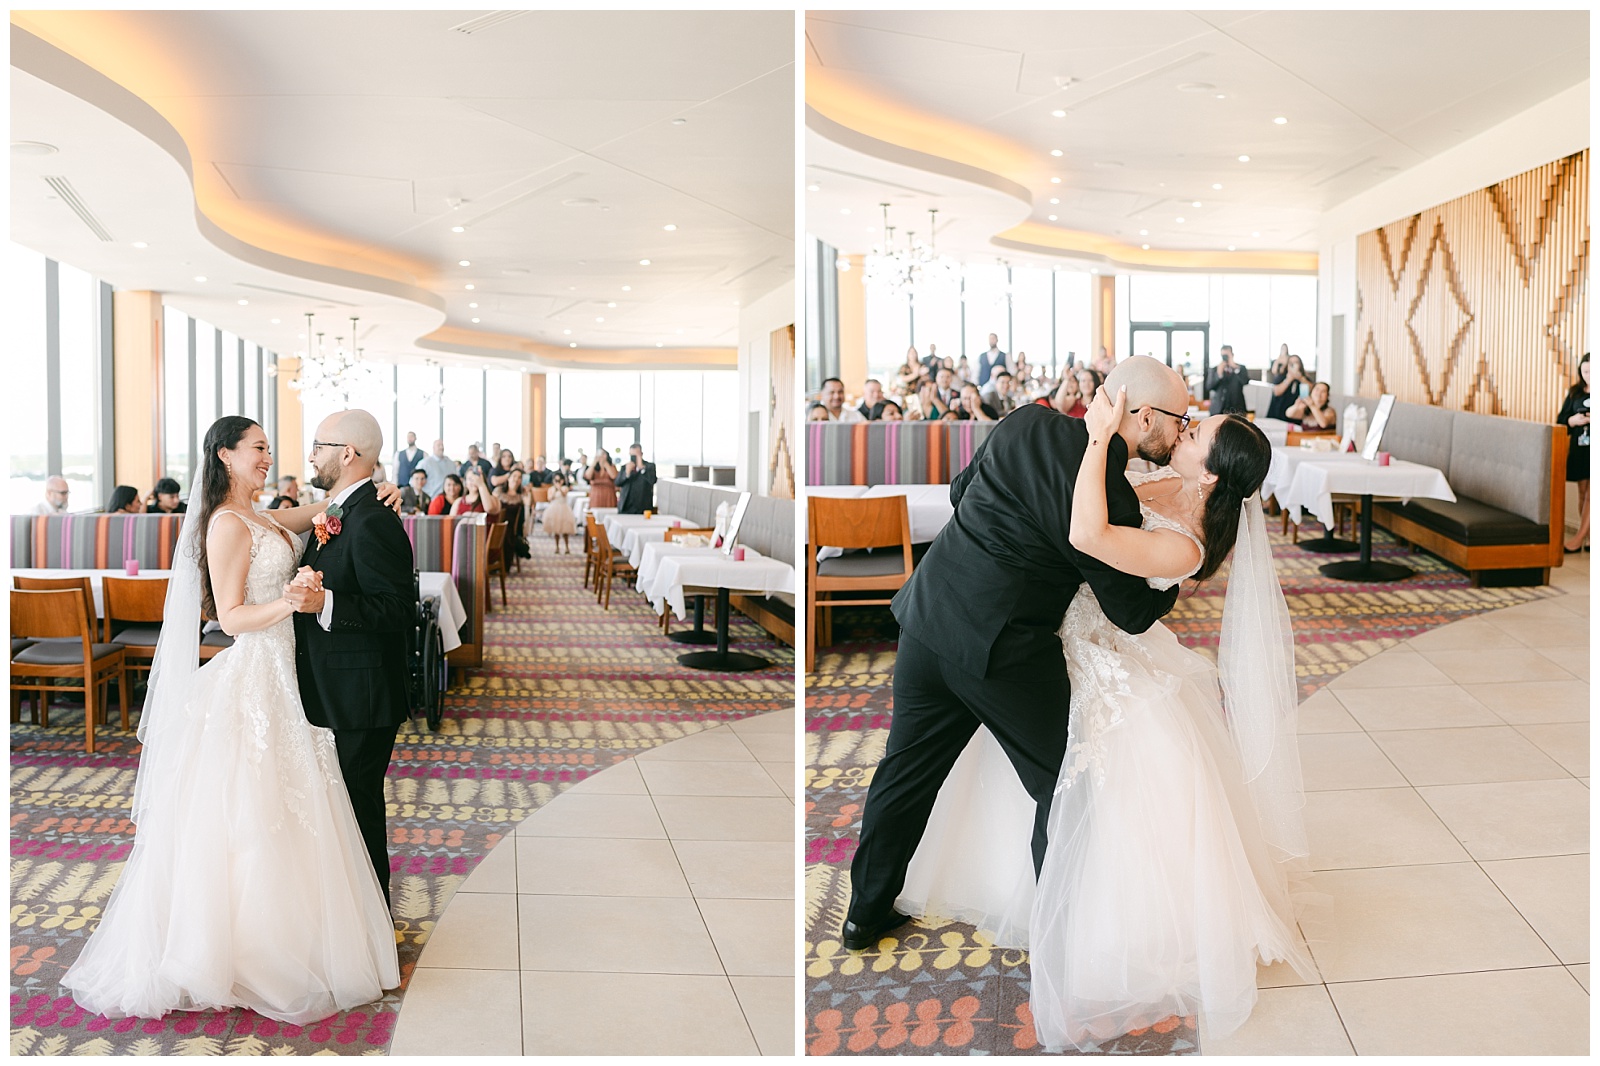 Bride and groom share their first dance as husband and wife by Elizabeth Kane Photography in Orlando Florida